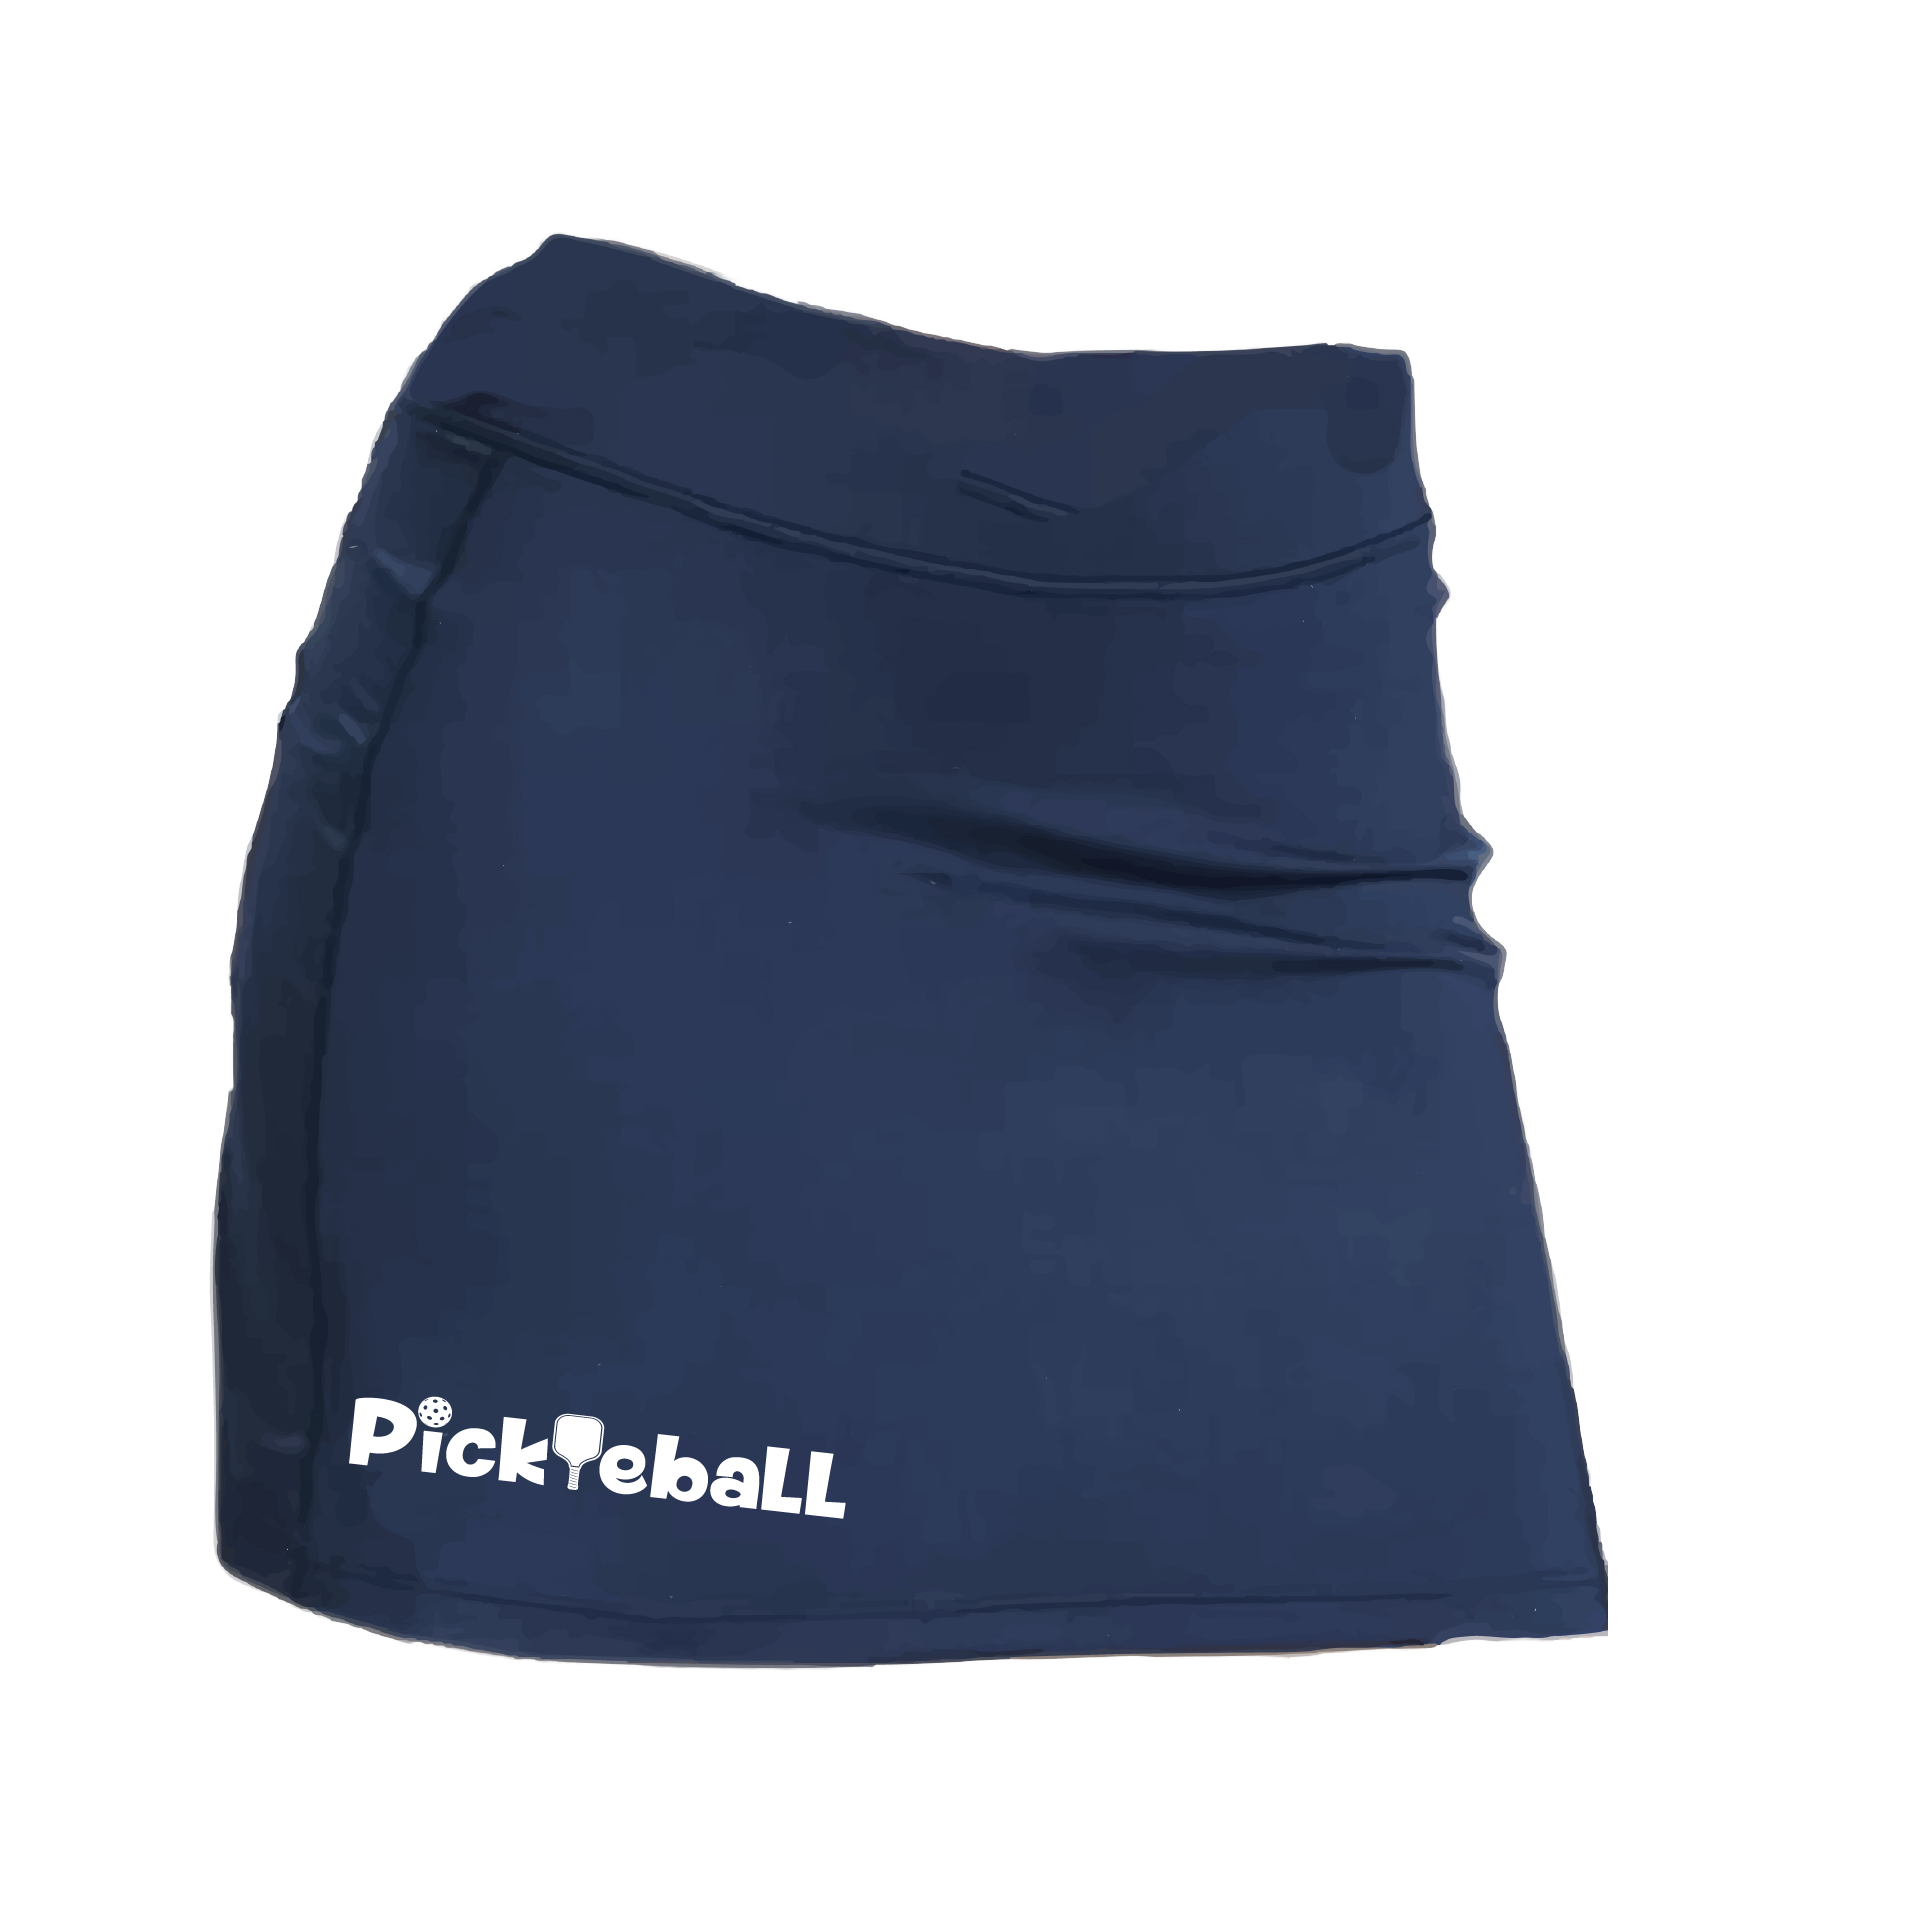 Pickleball Design: Pickleball Horizontal  Women’s core active jersey-knit skort comes with built-in shorts made out of a poly-spandex blend that will keep your legs from rubbing together, without which often results in painful chafing. You can also feel secure knowing that no matter how strenuous the exercise, the skort will remain in place (it won’t ride up!). The fabric is breathable, featuring Dri-Works wicking technology